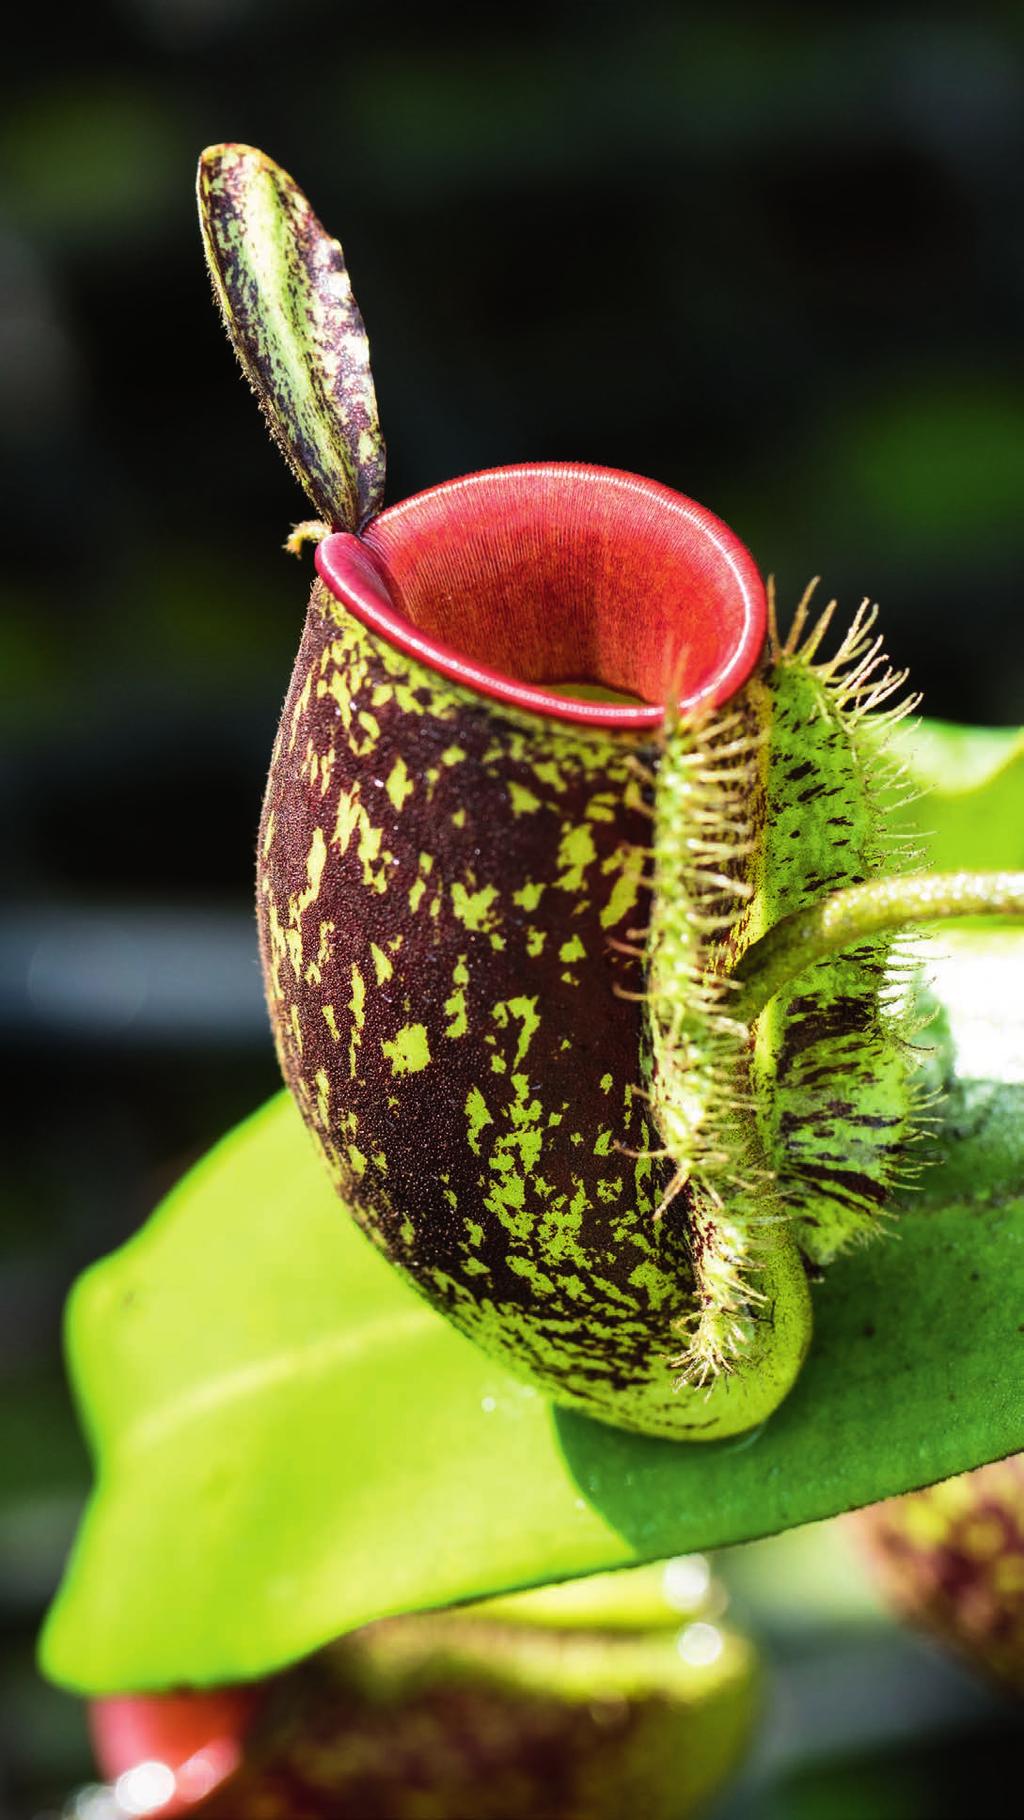 Nepenthes ampullaria Cherry Delight The lower pitchers are brown with green markings and the peristome is